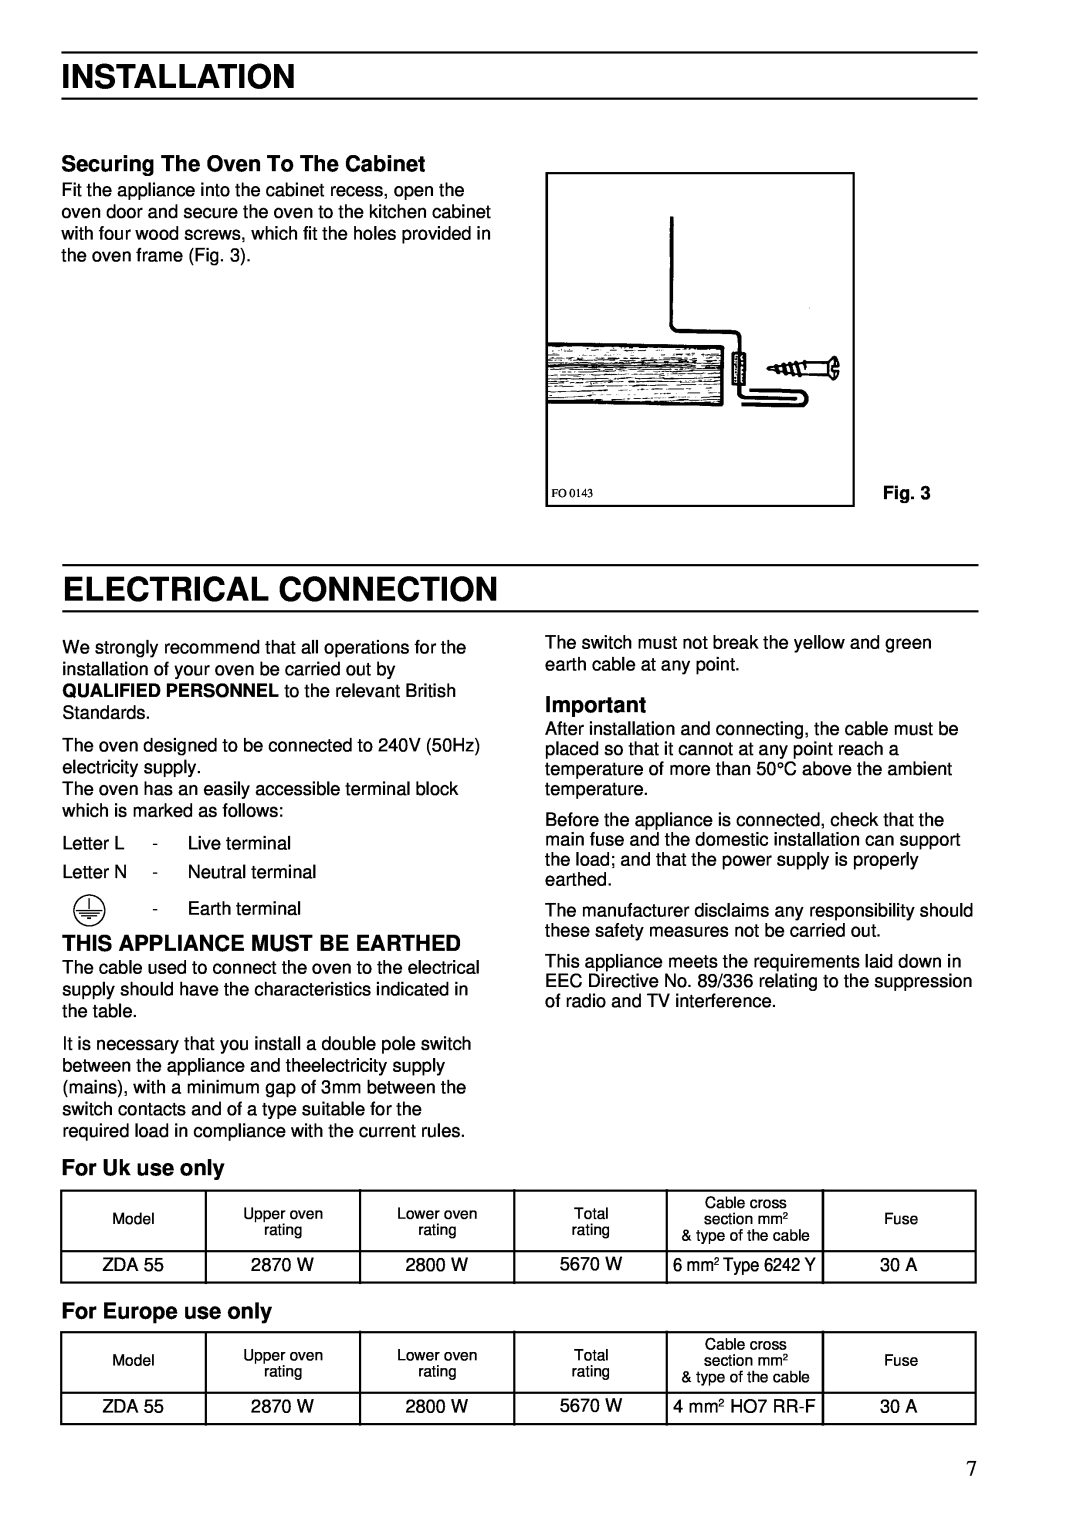 Zanussi ZDA 55 Electrical Connection, Installation, Securing The Oven To The Cabinet, This Appliance Must Be Earthed 